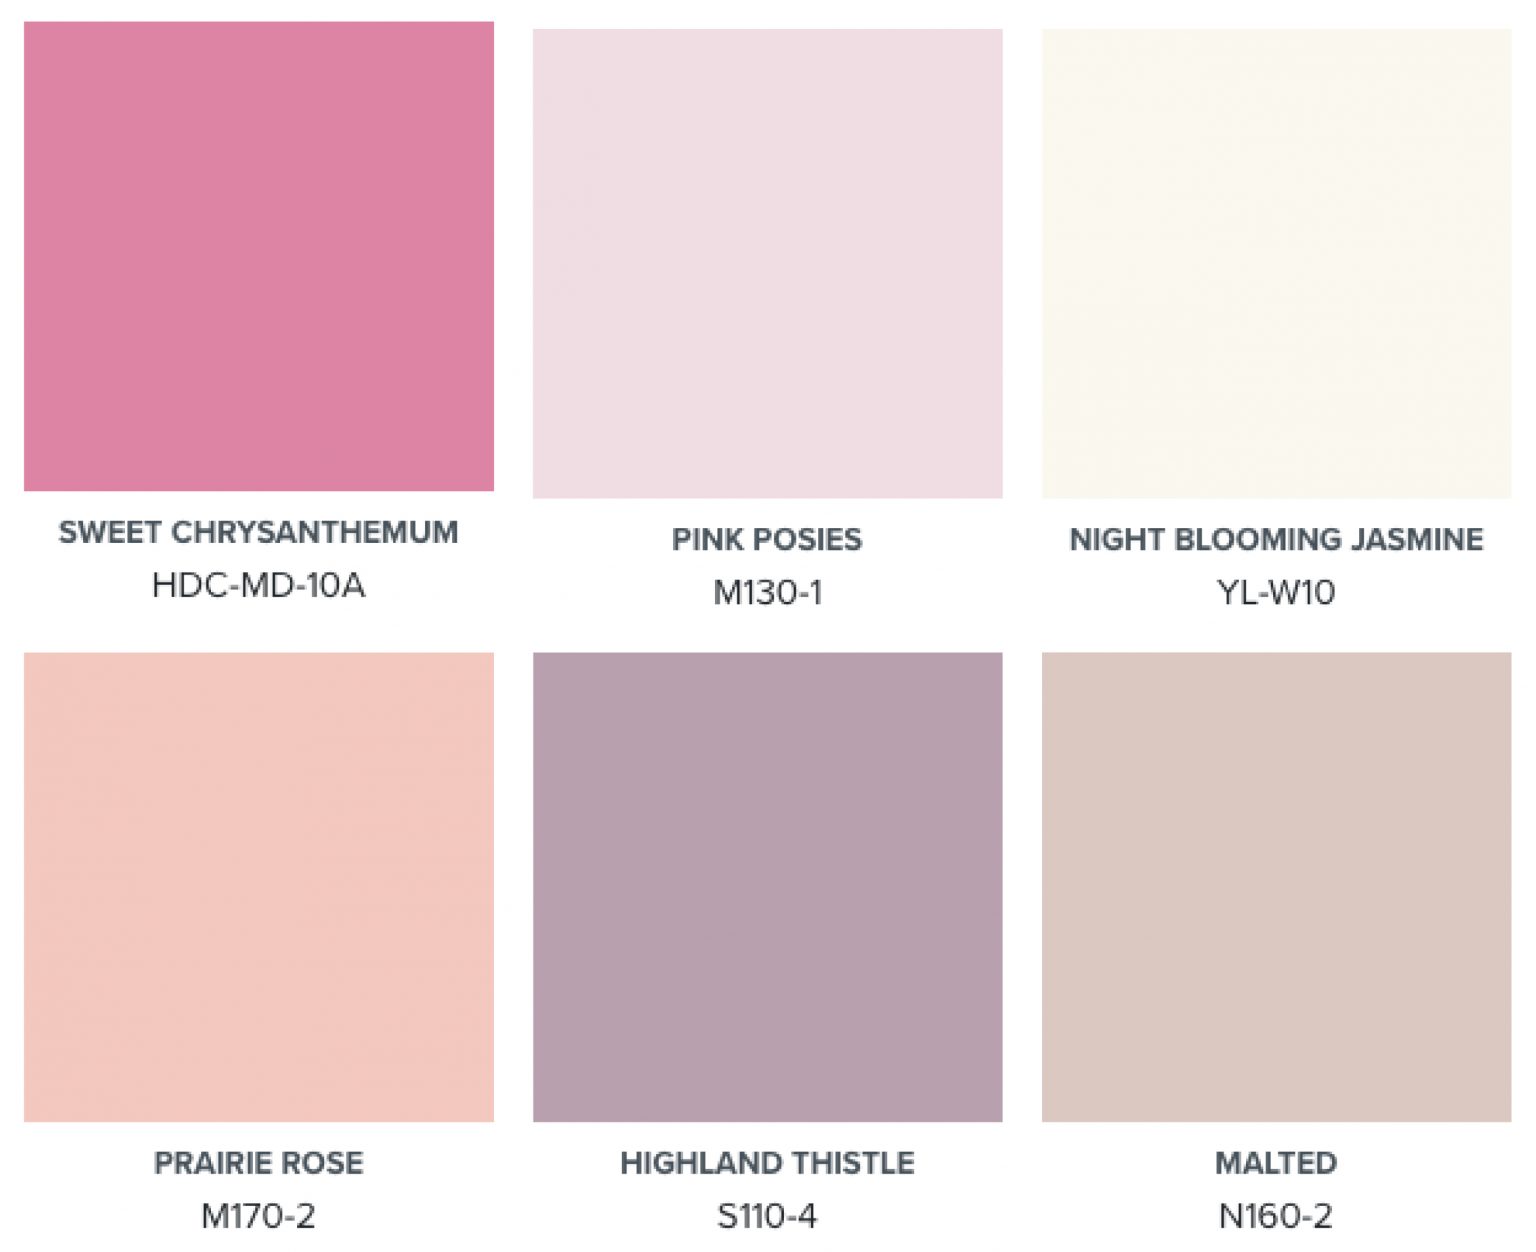 A palette of six colours – Sweet Chrysanthemum, Pink Posies, Night Blooming Jasmine, Prairie Rose, Highland Thistle, and Malted